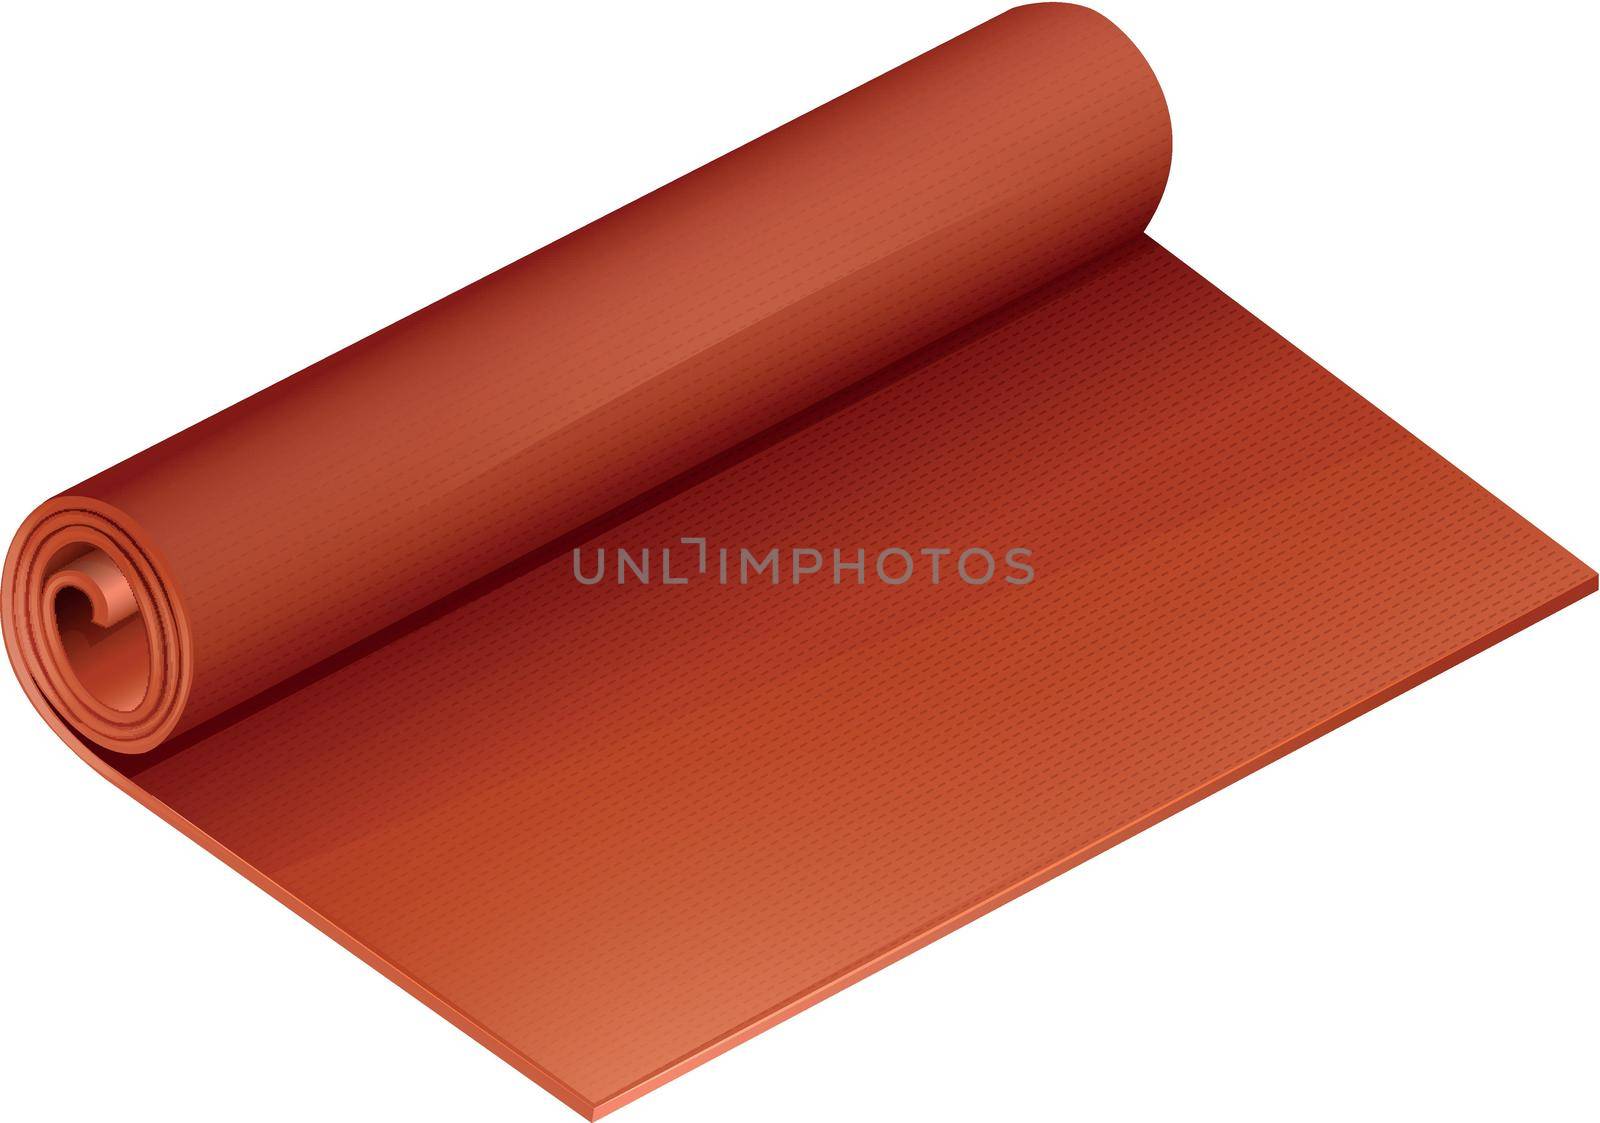 Rolled mat by iimages